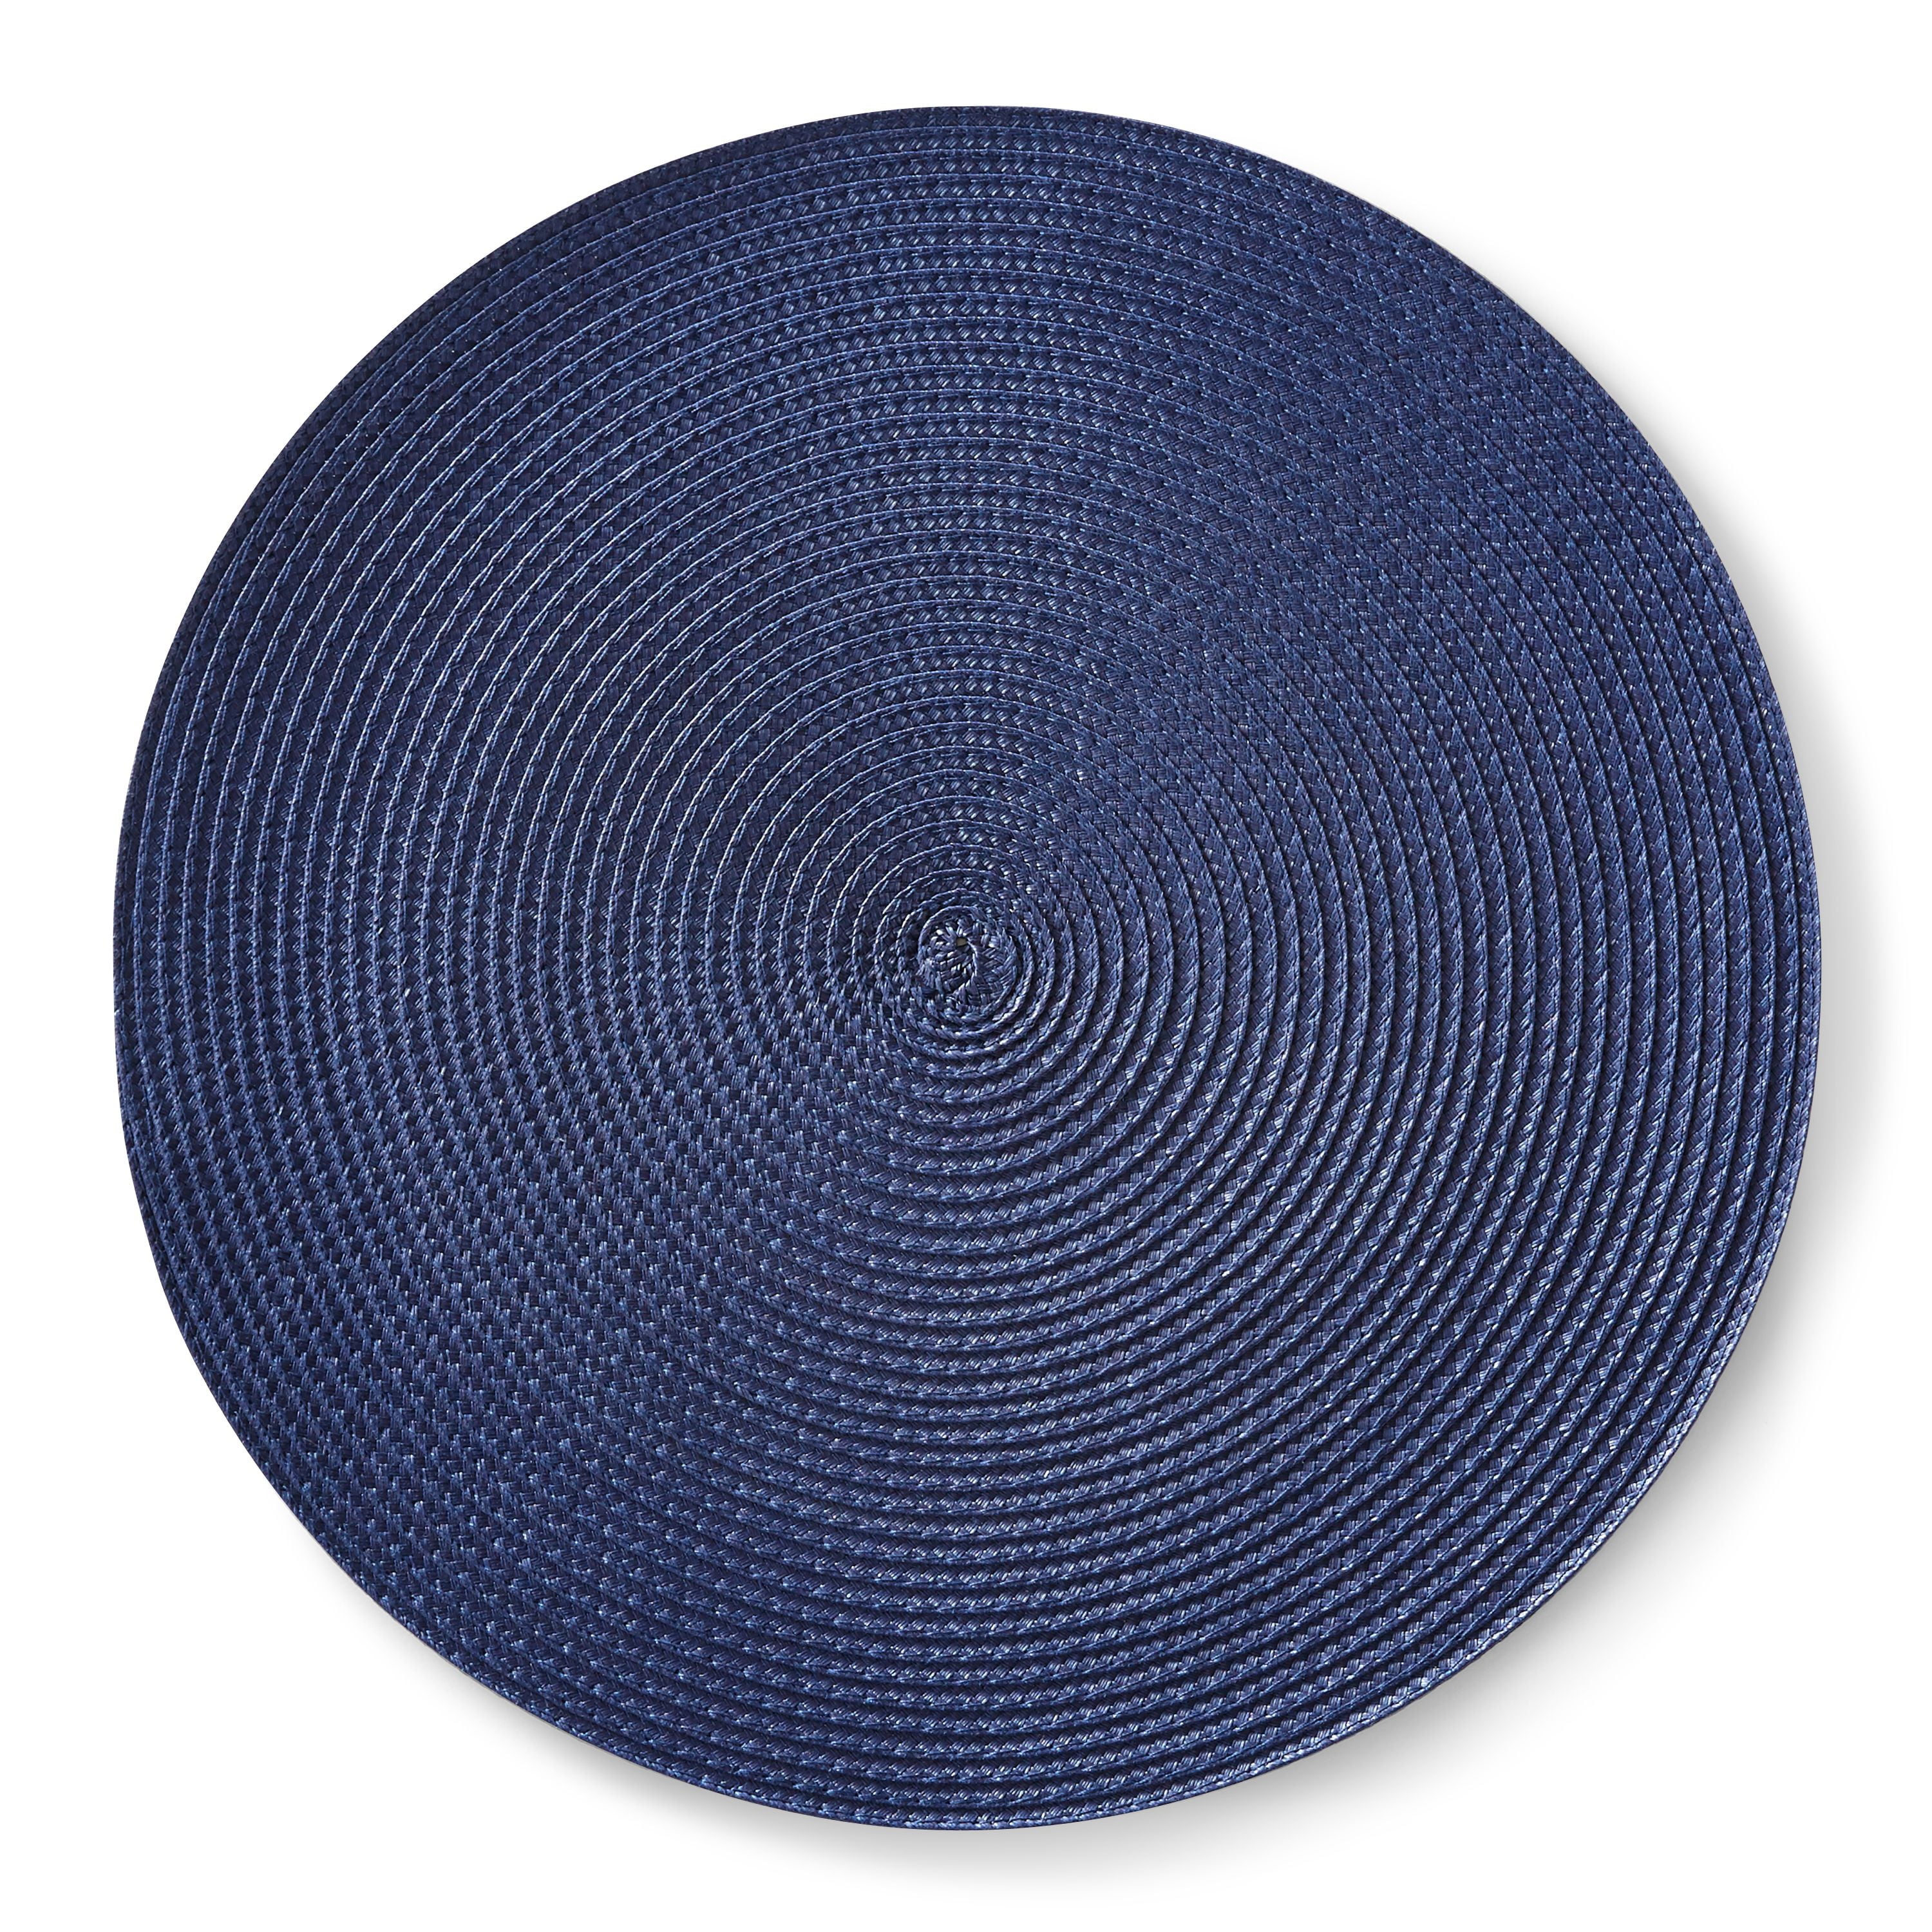 Mainstays Mars Placemat Navy 15, Navy Blue Round Placemats